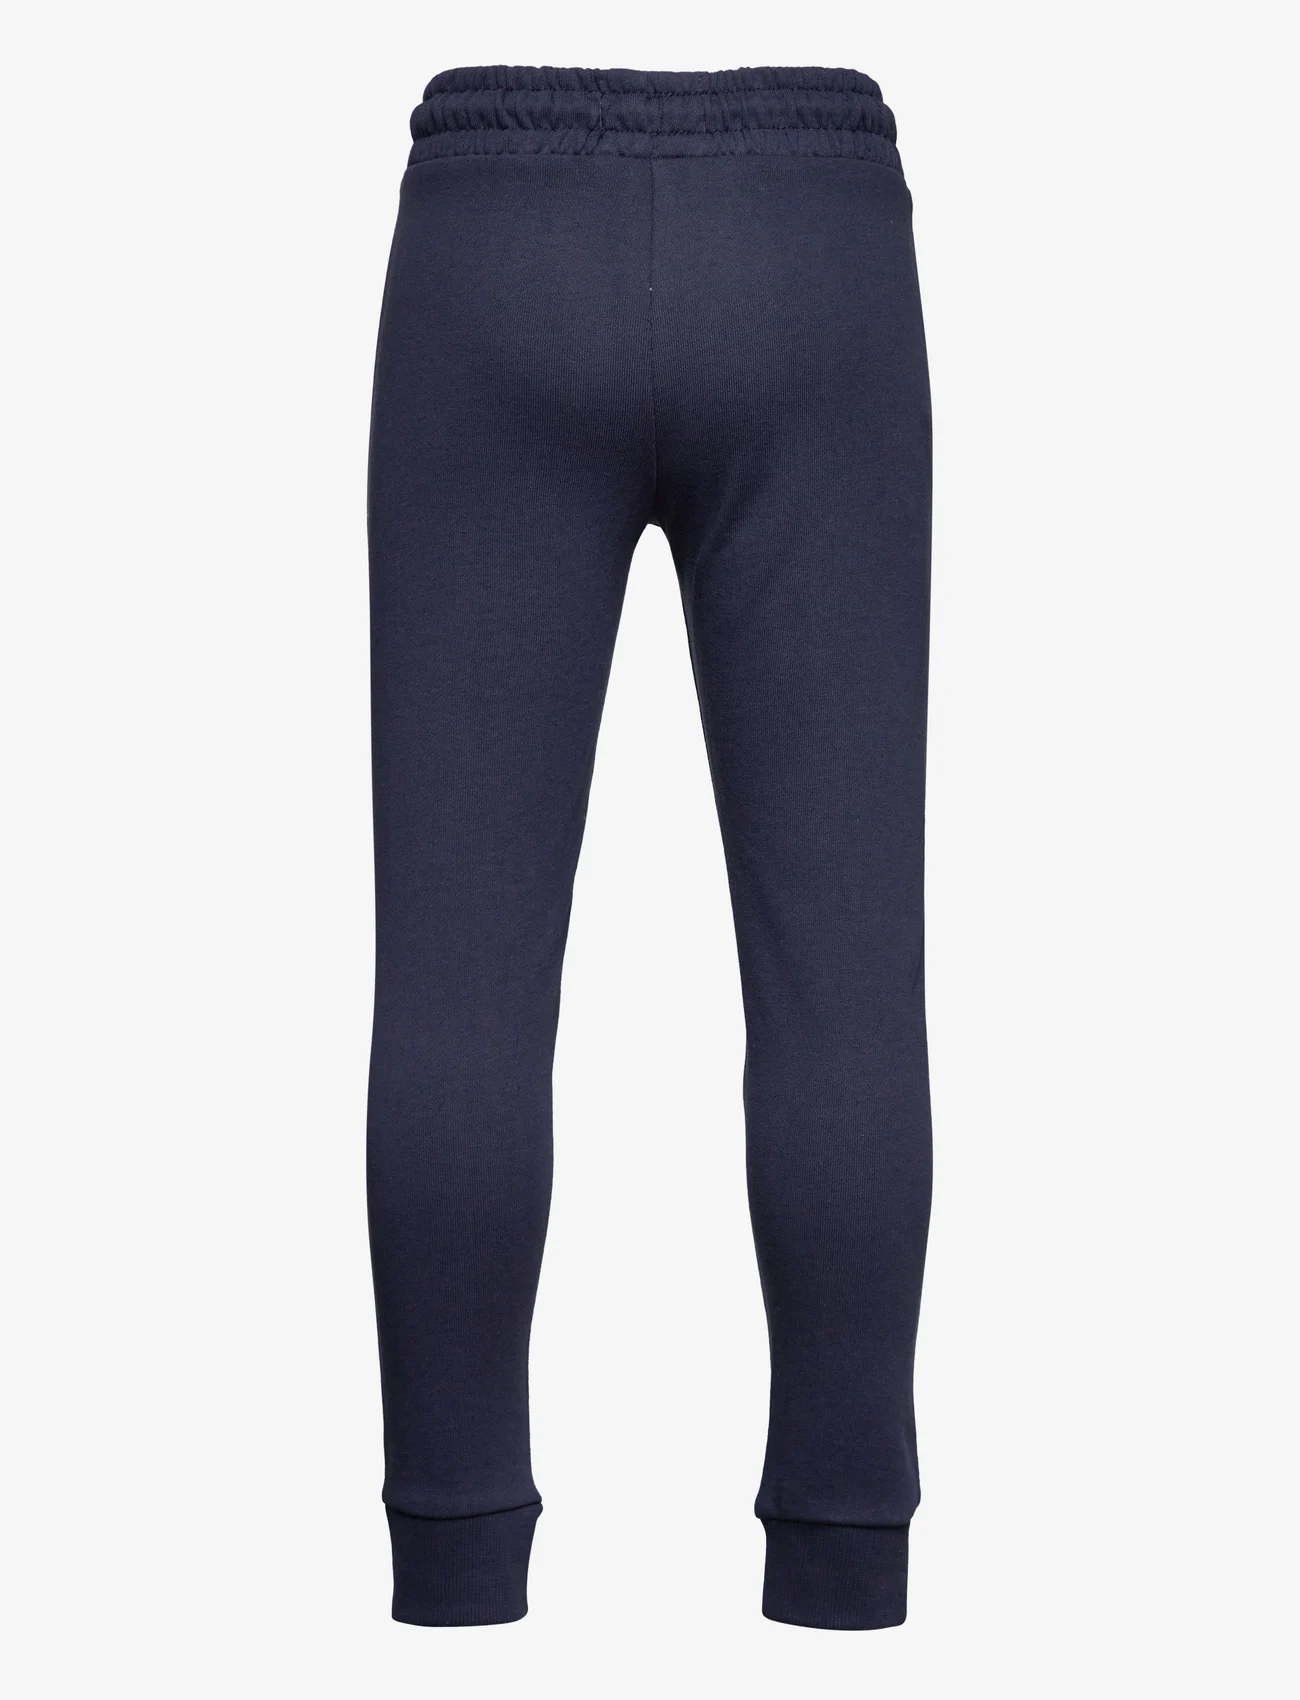 Mango - Cotton jogger-style trousers - navy - 1